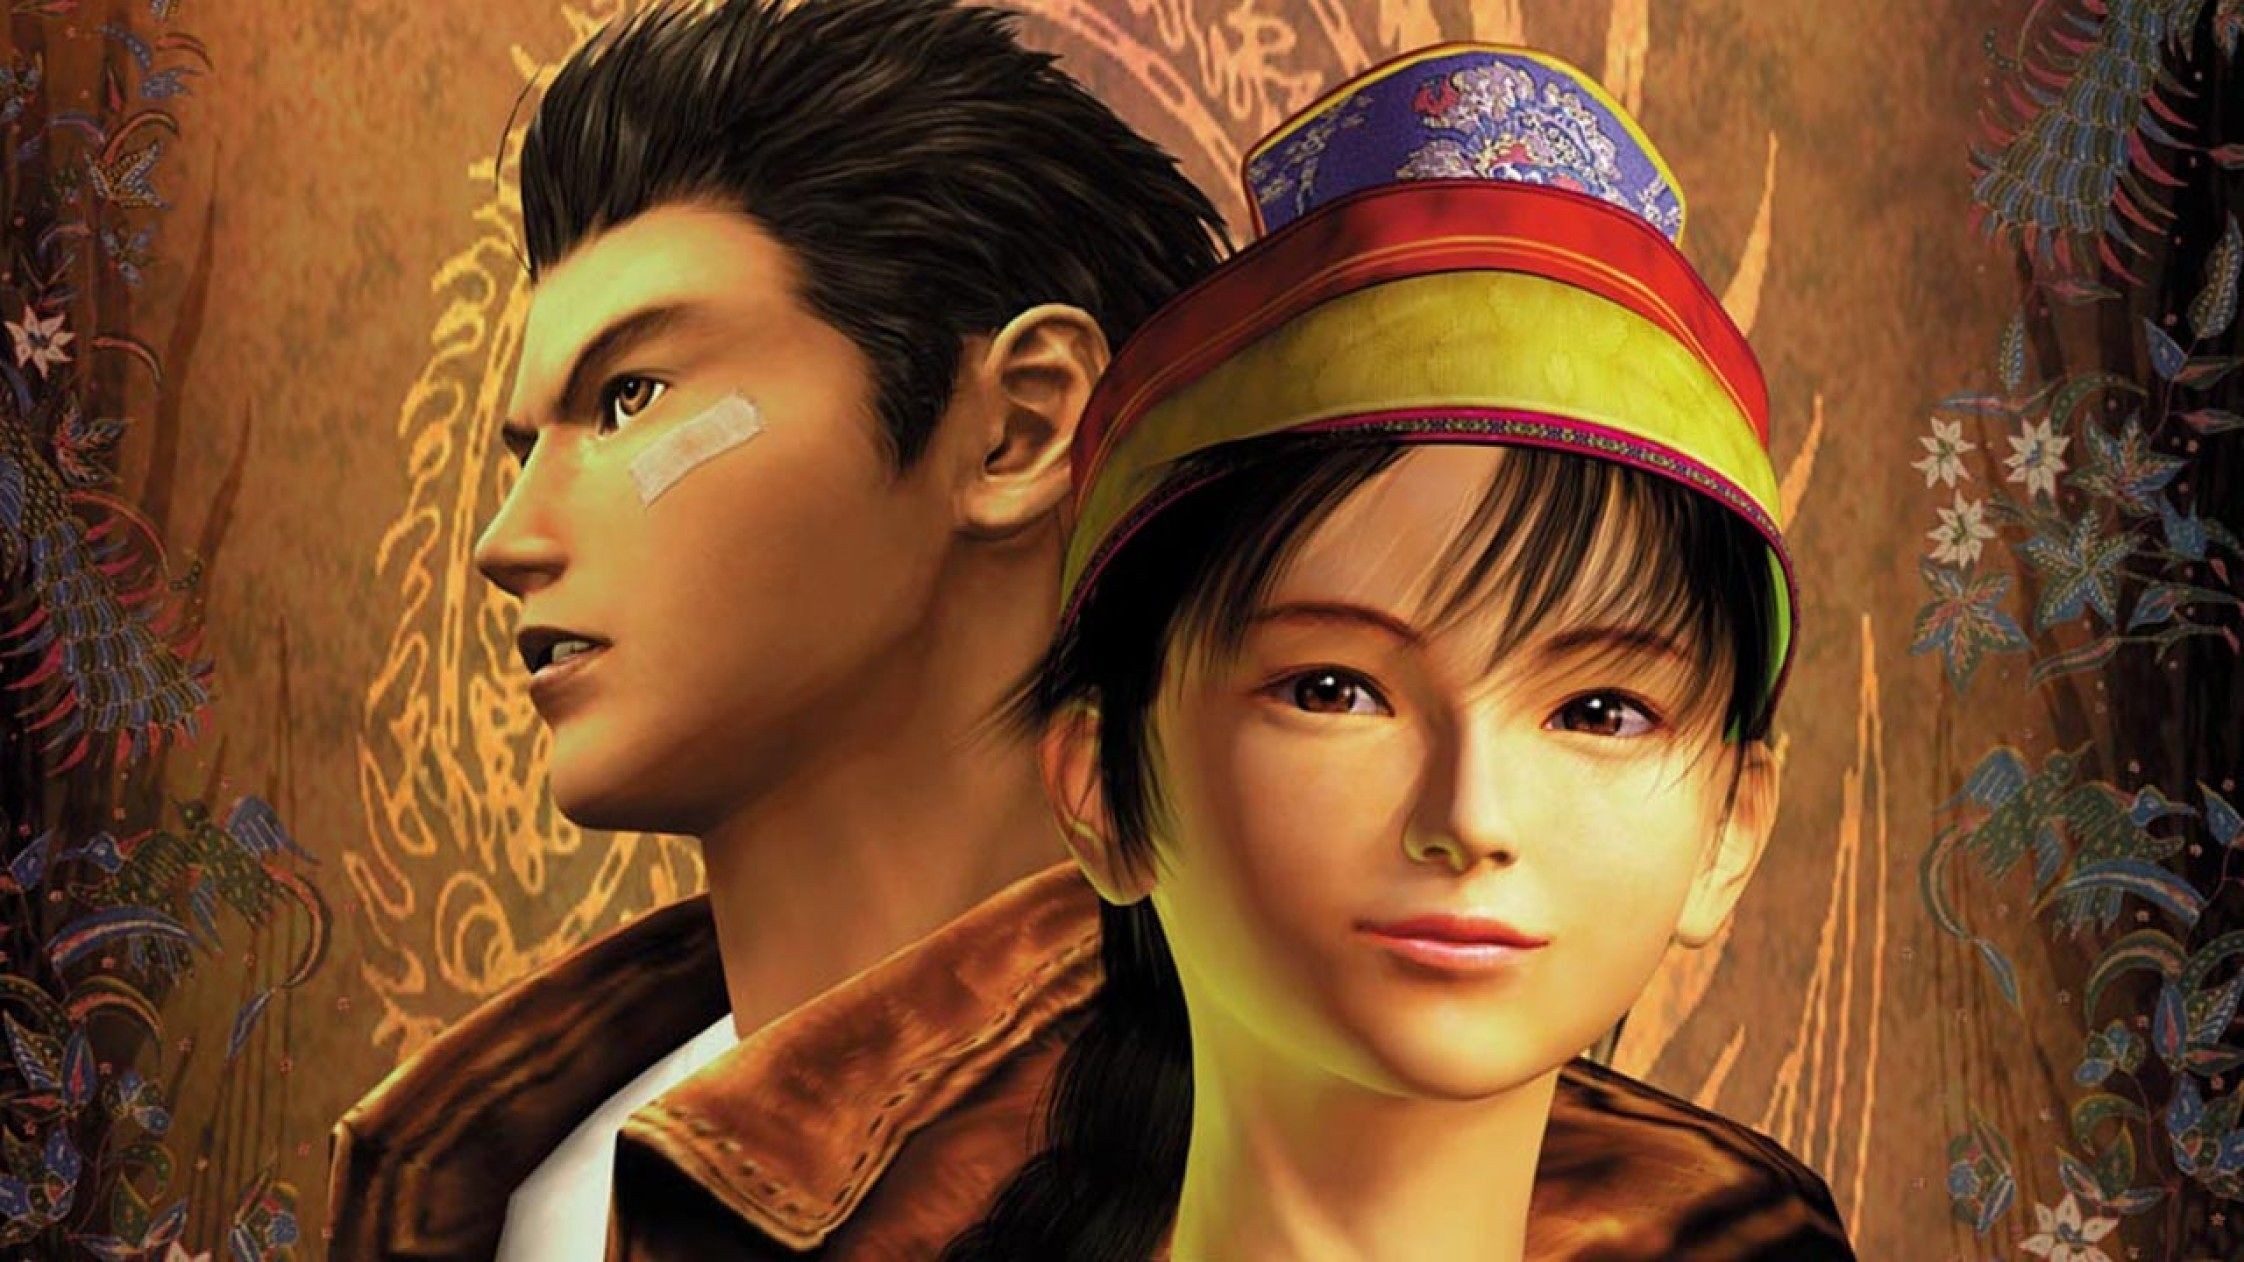 shenmue-3-kickstarter-what-is-it-that-makes-shenmue-so-special-shenmue-3-484439